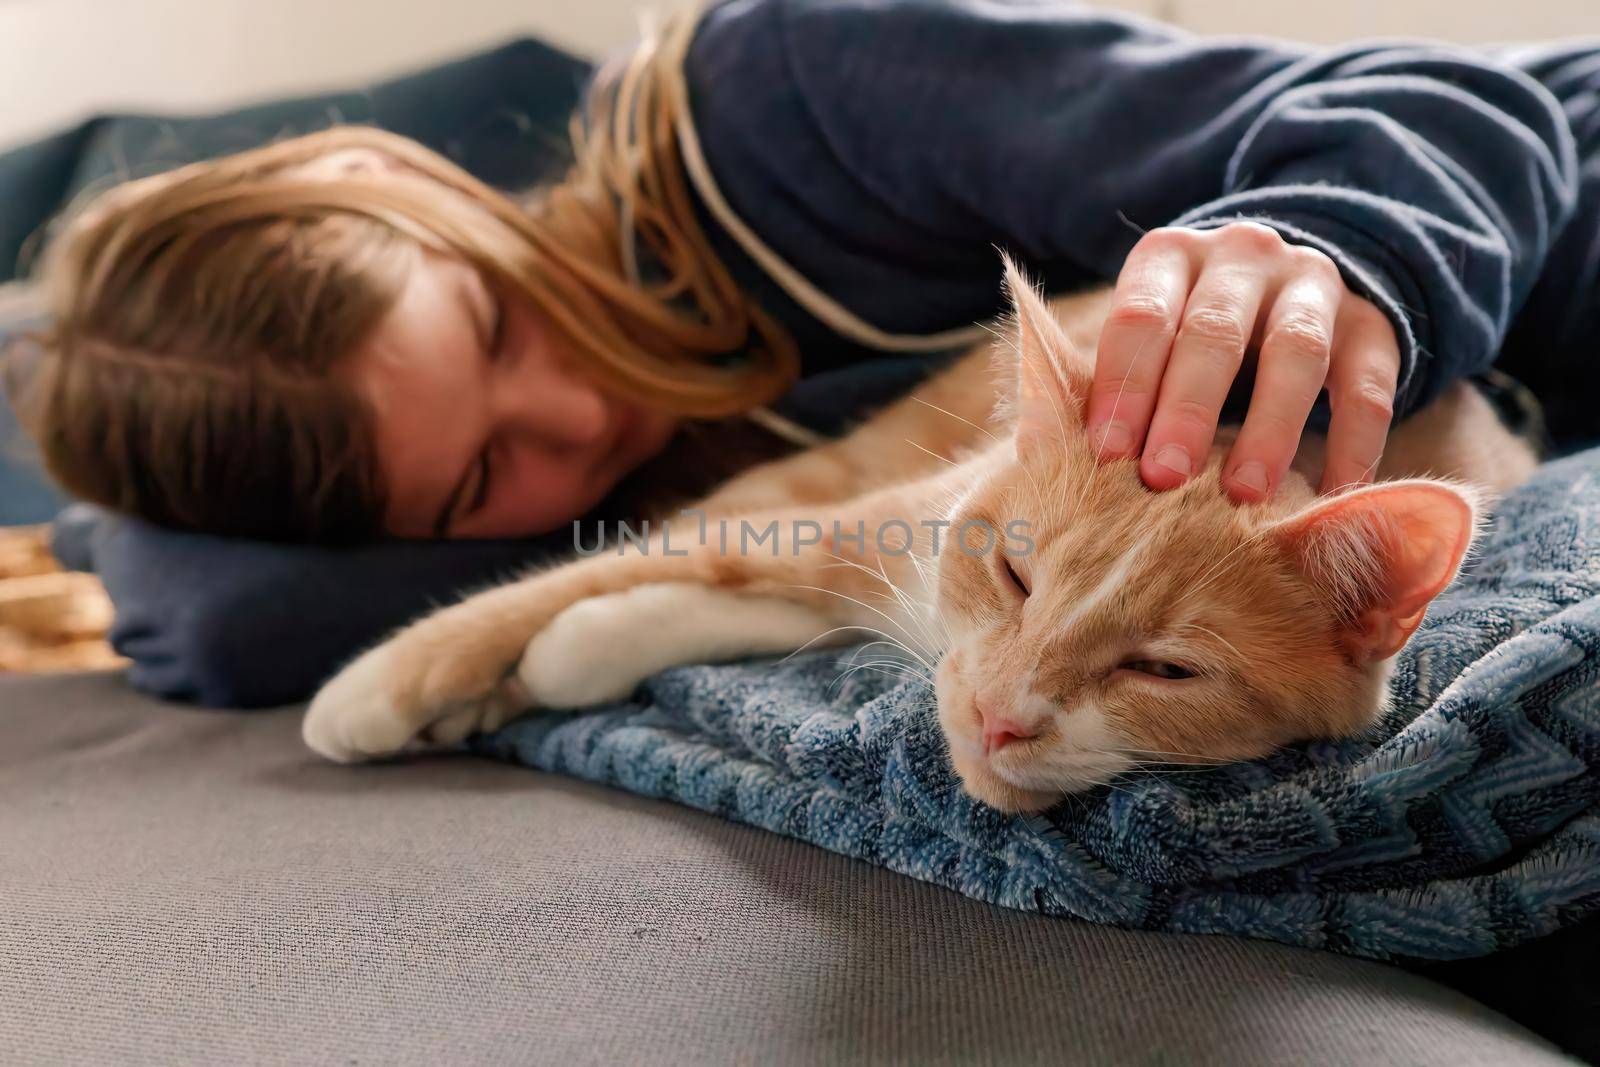 An Young Adolescent girl lying on a couch finds comfort by snuggling close to and petting her tabby cat